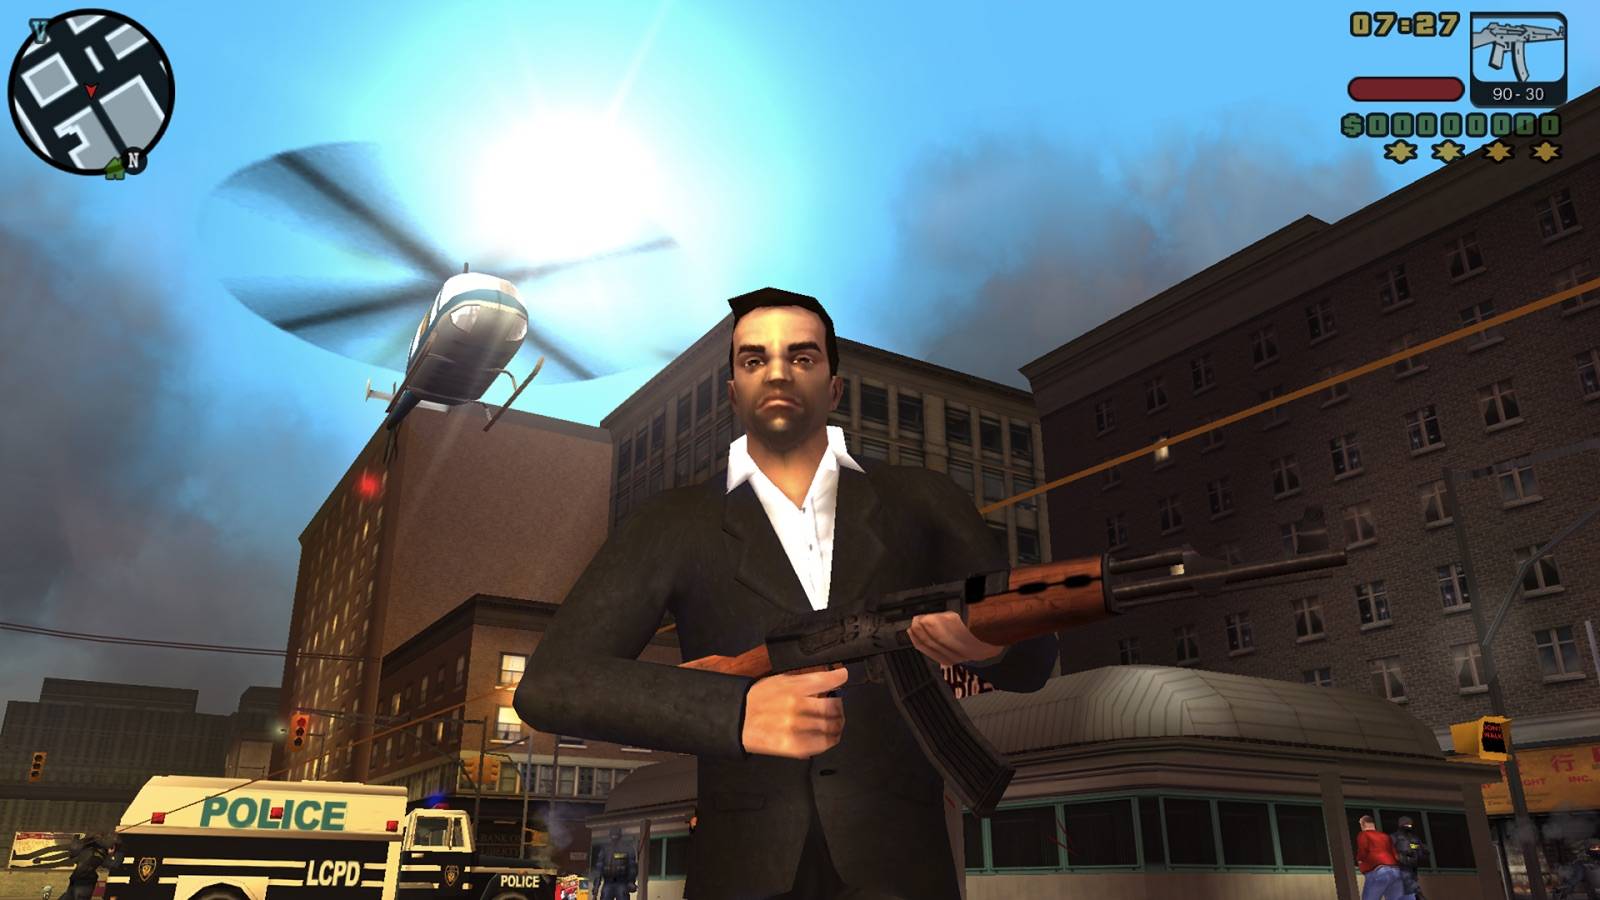 gta episodes from liberty city stories